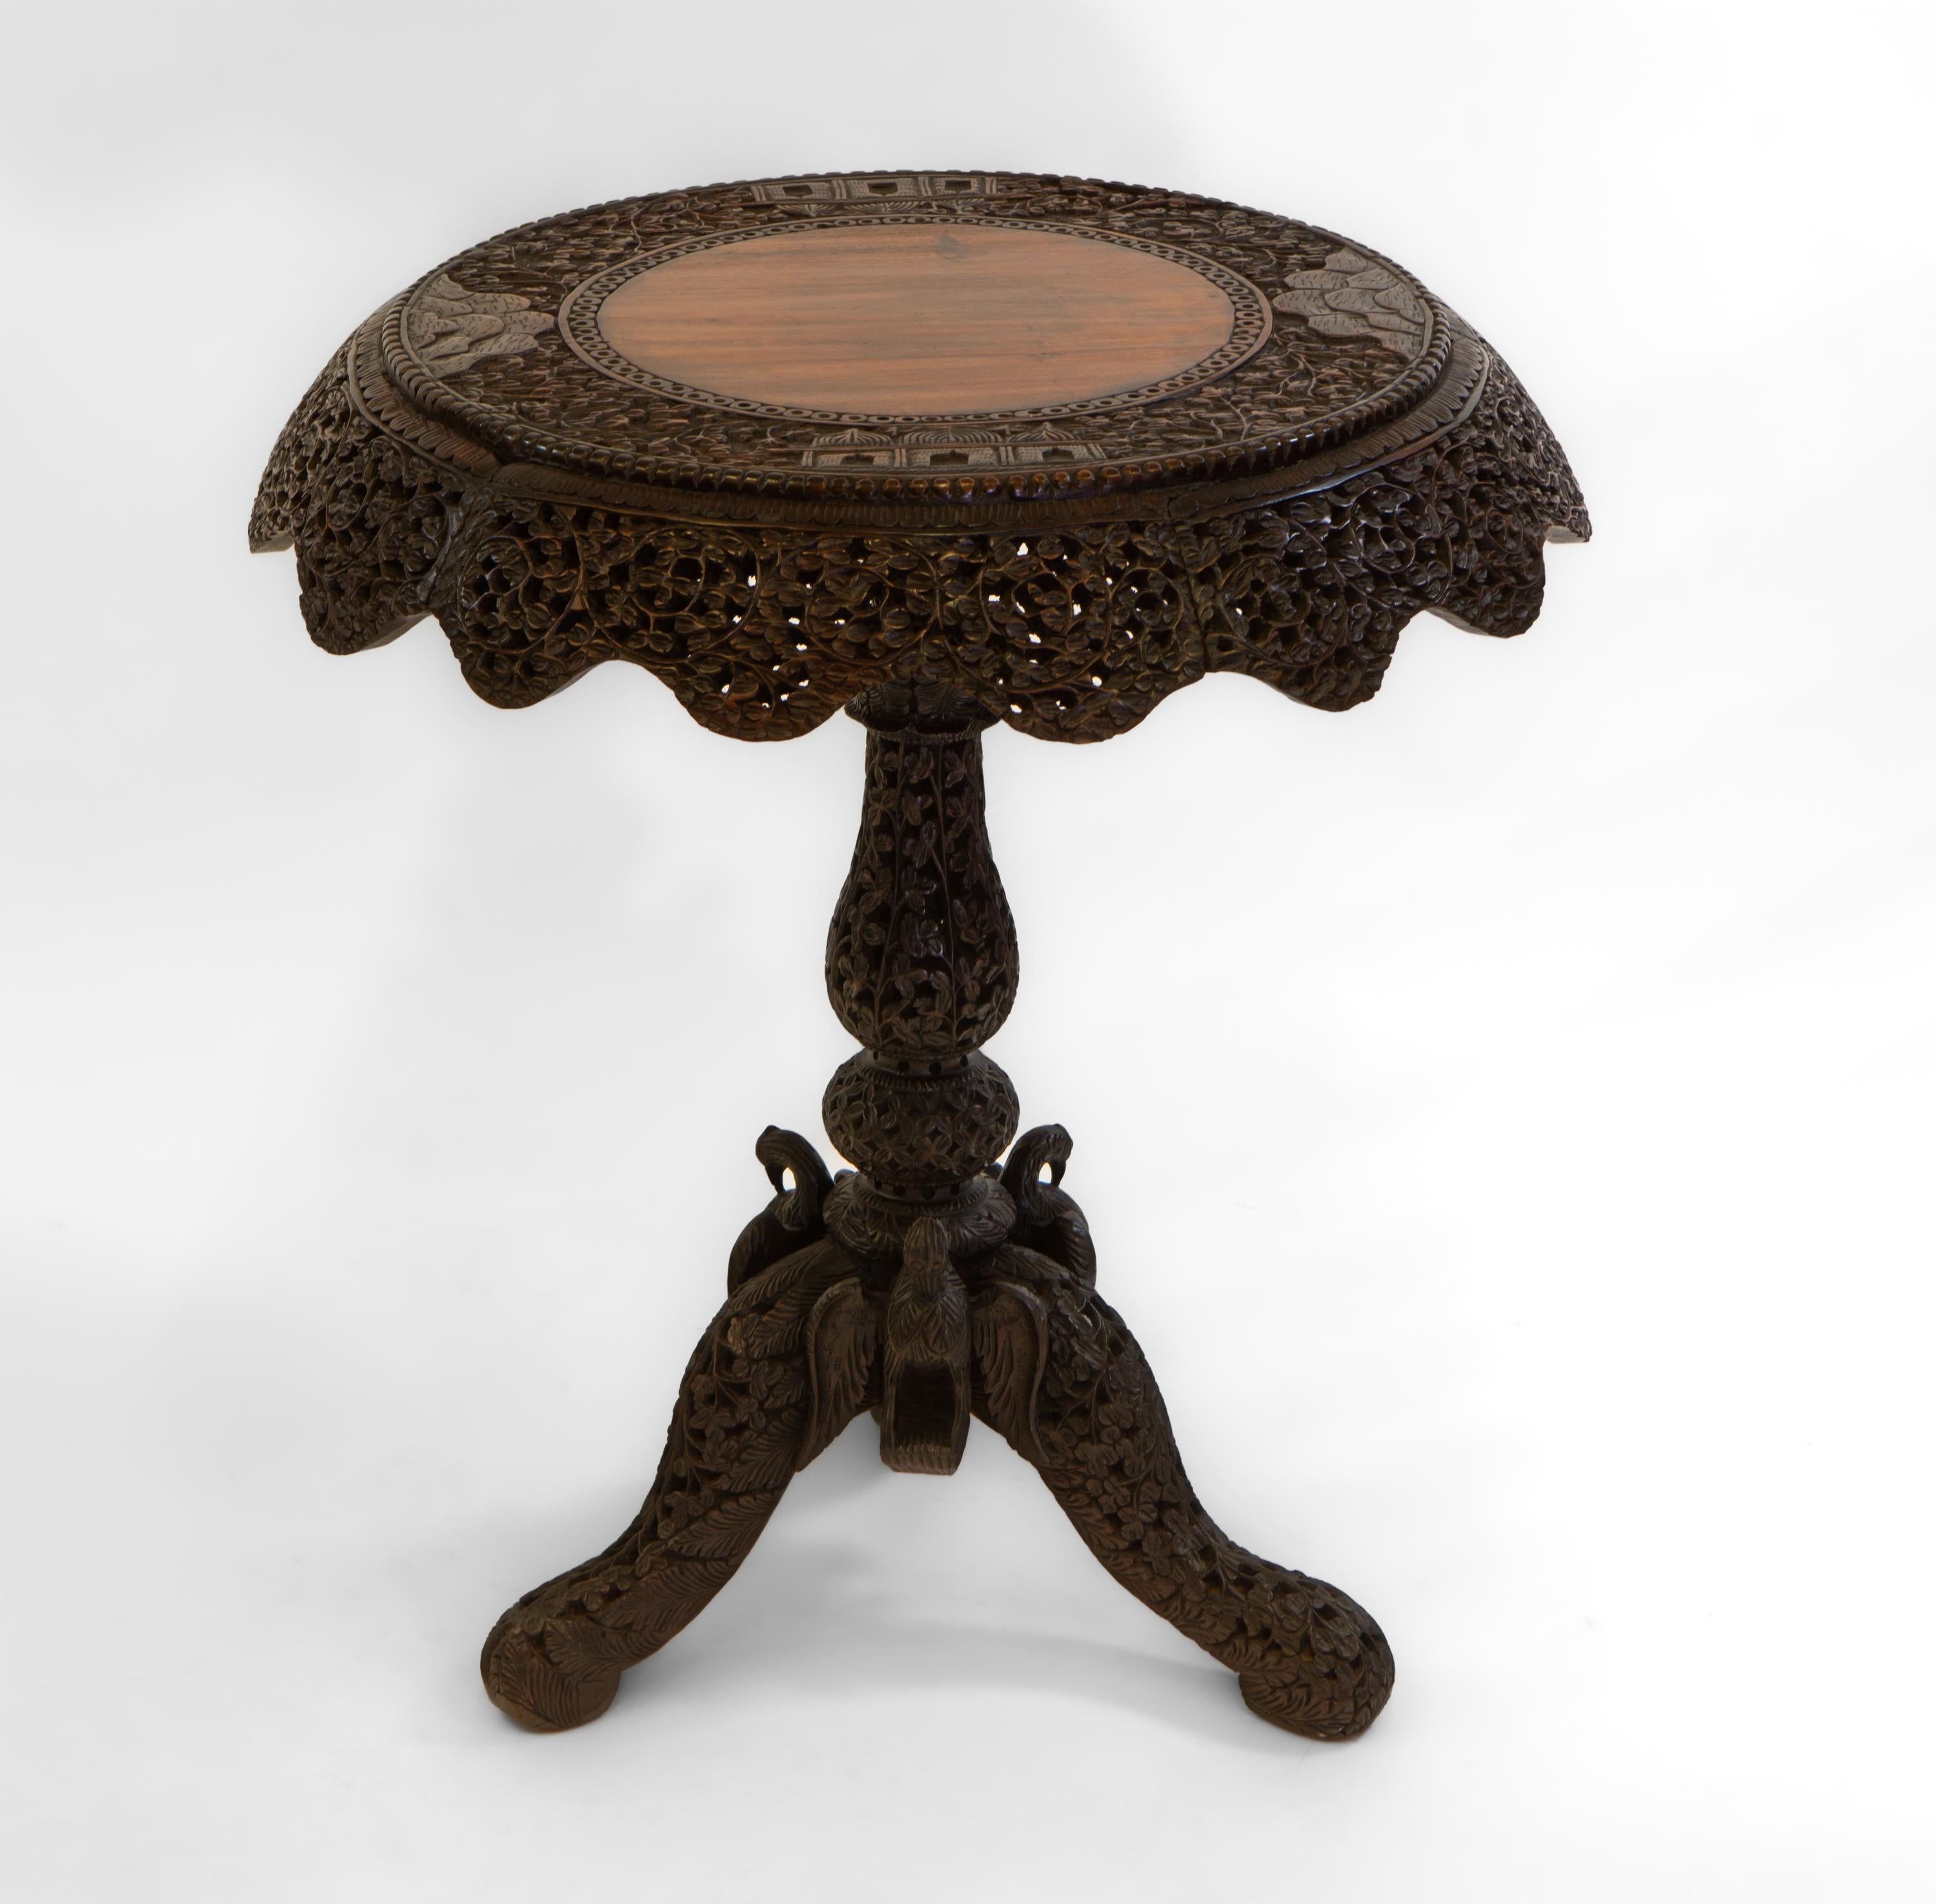 A wonderful antique profusely hand carved Burmese (modern day Myanmar) Anglo Indian Padauk wood tilt top occasional side table. Circa 1880.

The table top has a decorative border with shaped frieze. Pierced and carved foliage throughout the table